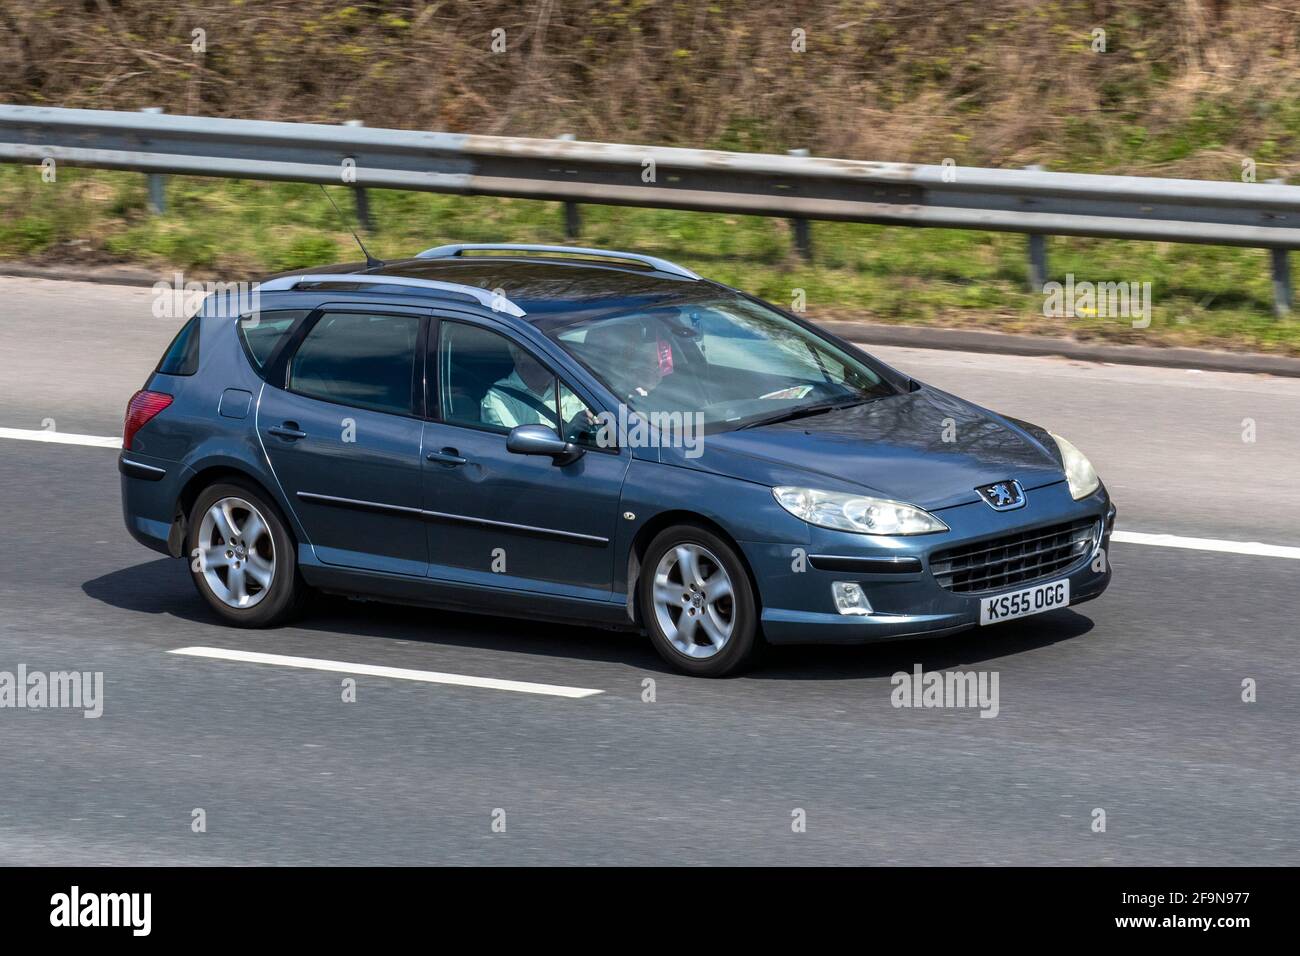 2006 grey Peugeot 407 Sw X-line Hdi 1997cc diesel estate; moving vehicles, cars, vehicle driving on UK roads, motors, motoring on the M6 English motorway road network Stock Photo